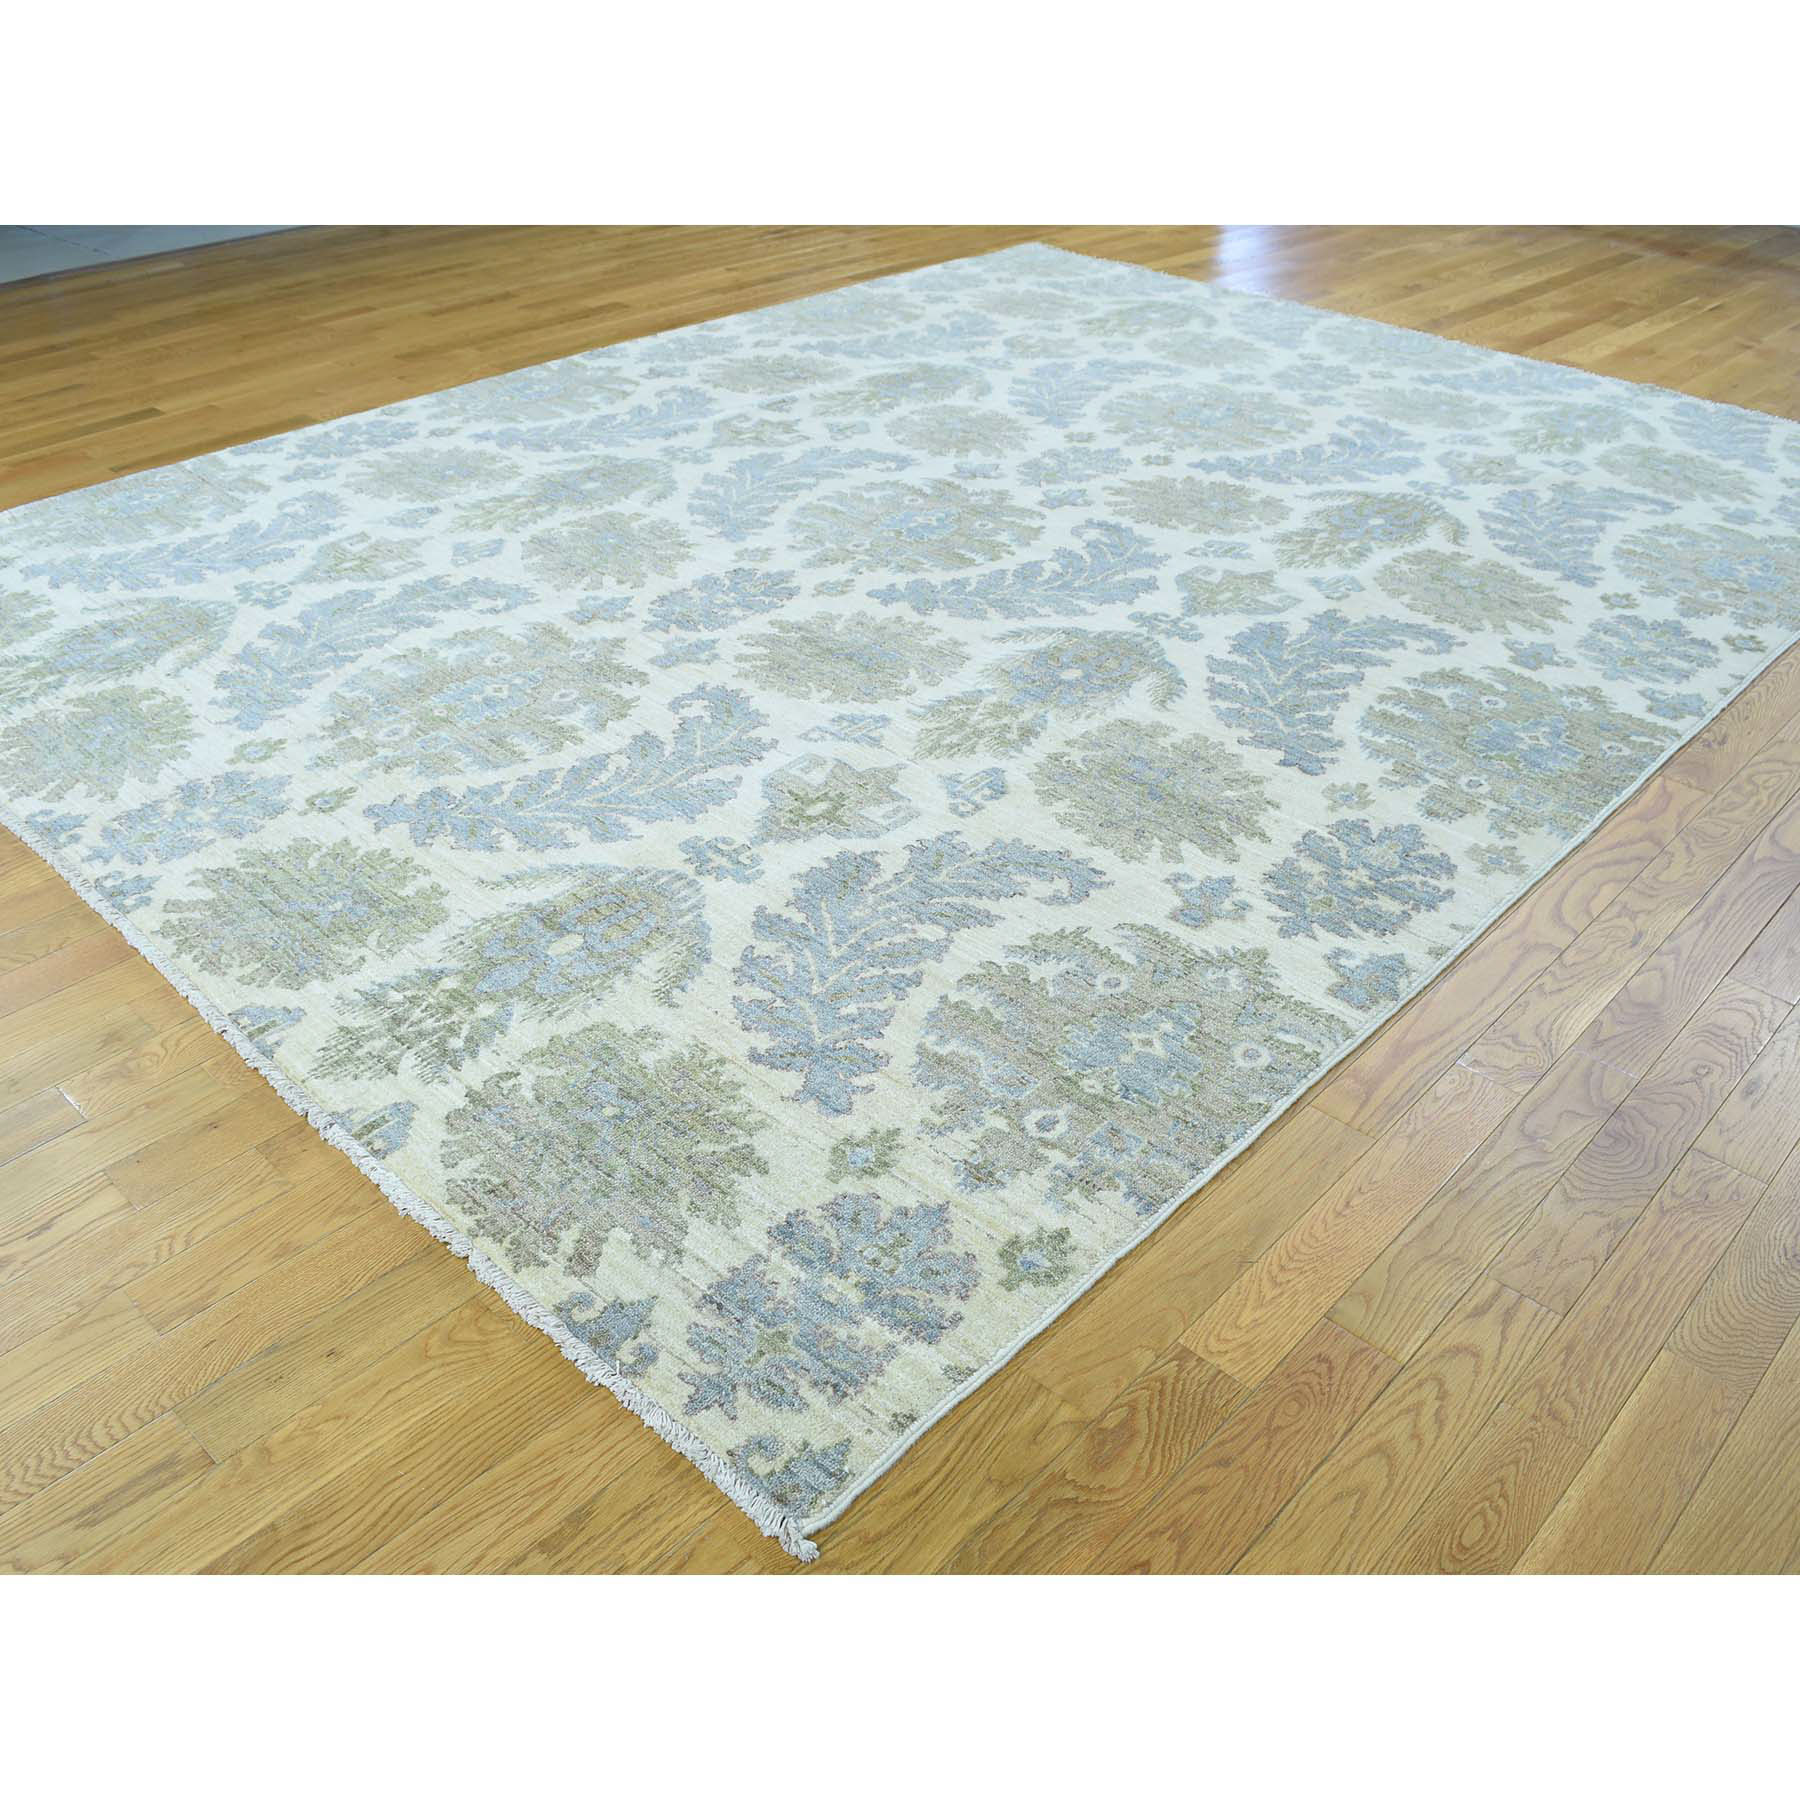 9-1 x12- Hand-Knotted Peshawar With Leaf Design Pure Wool Oriental Rug 